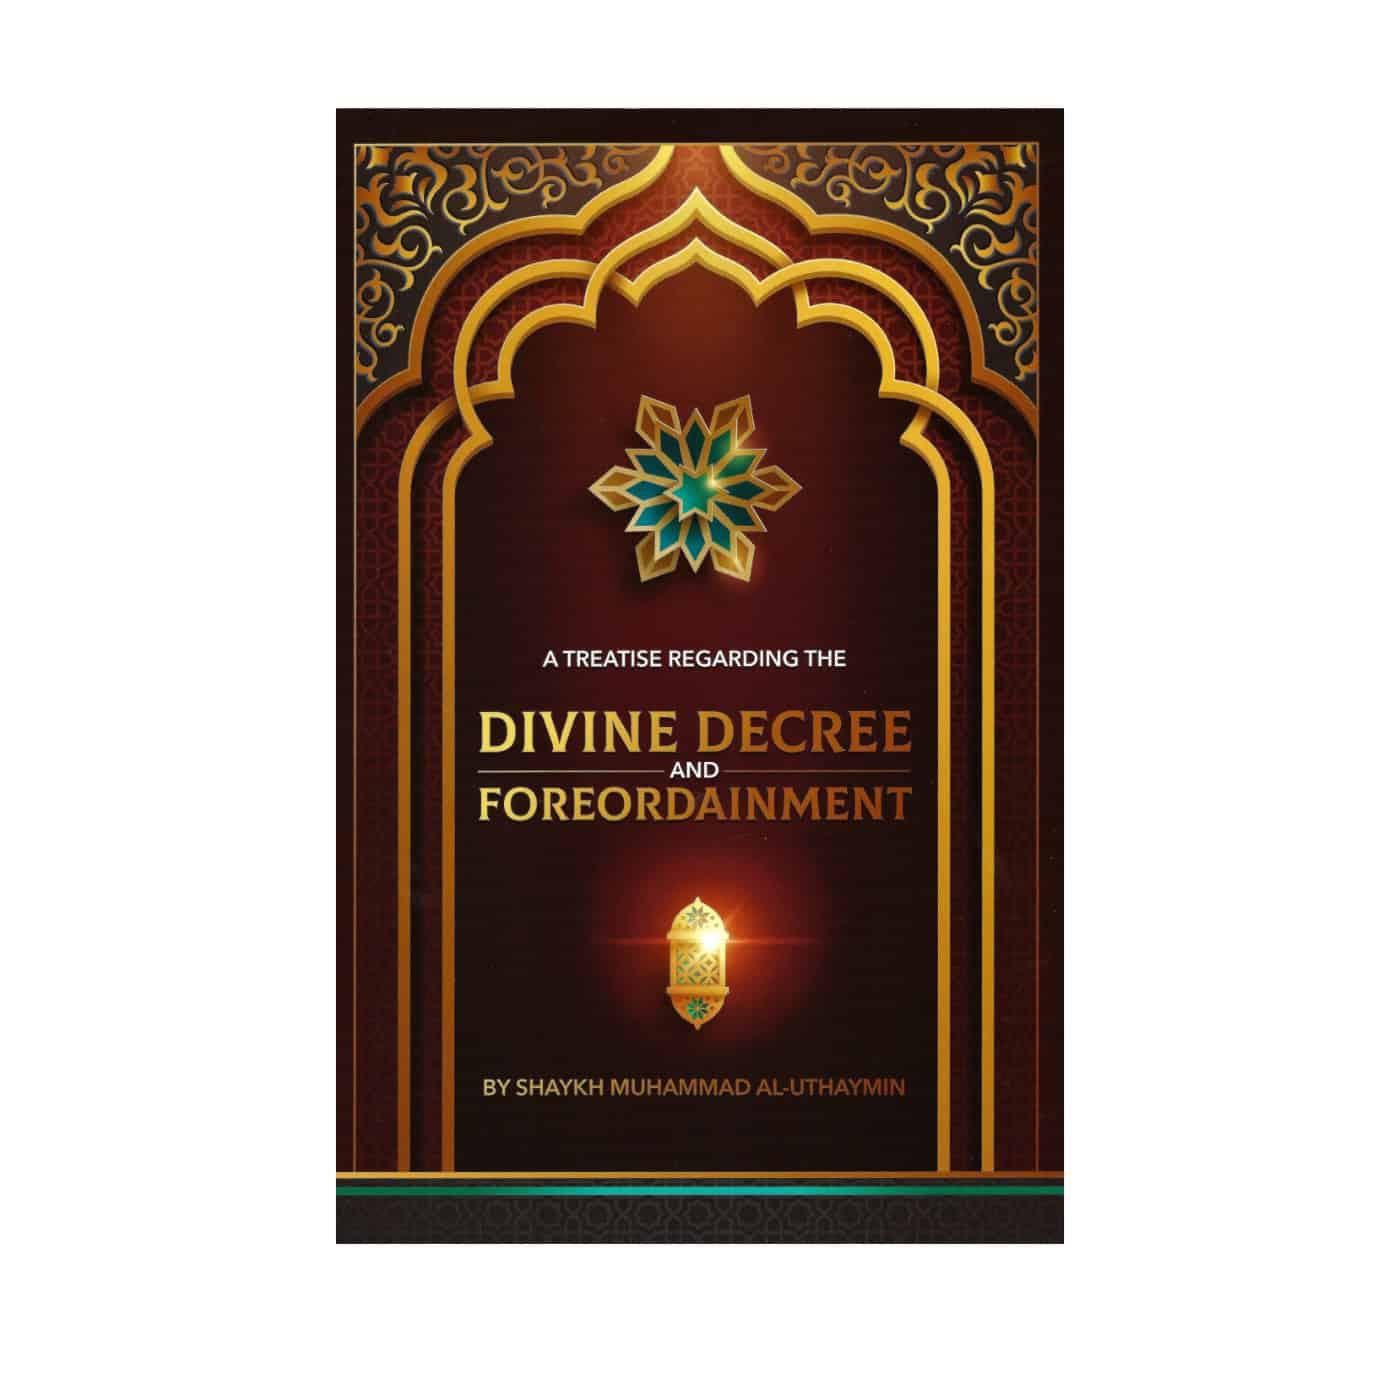 A Treatise Regarding The Divine Decree And Foreordainment